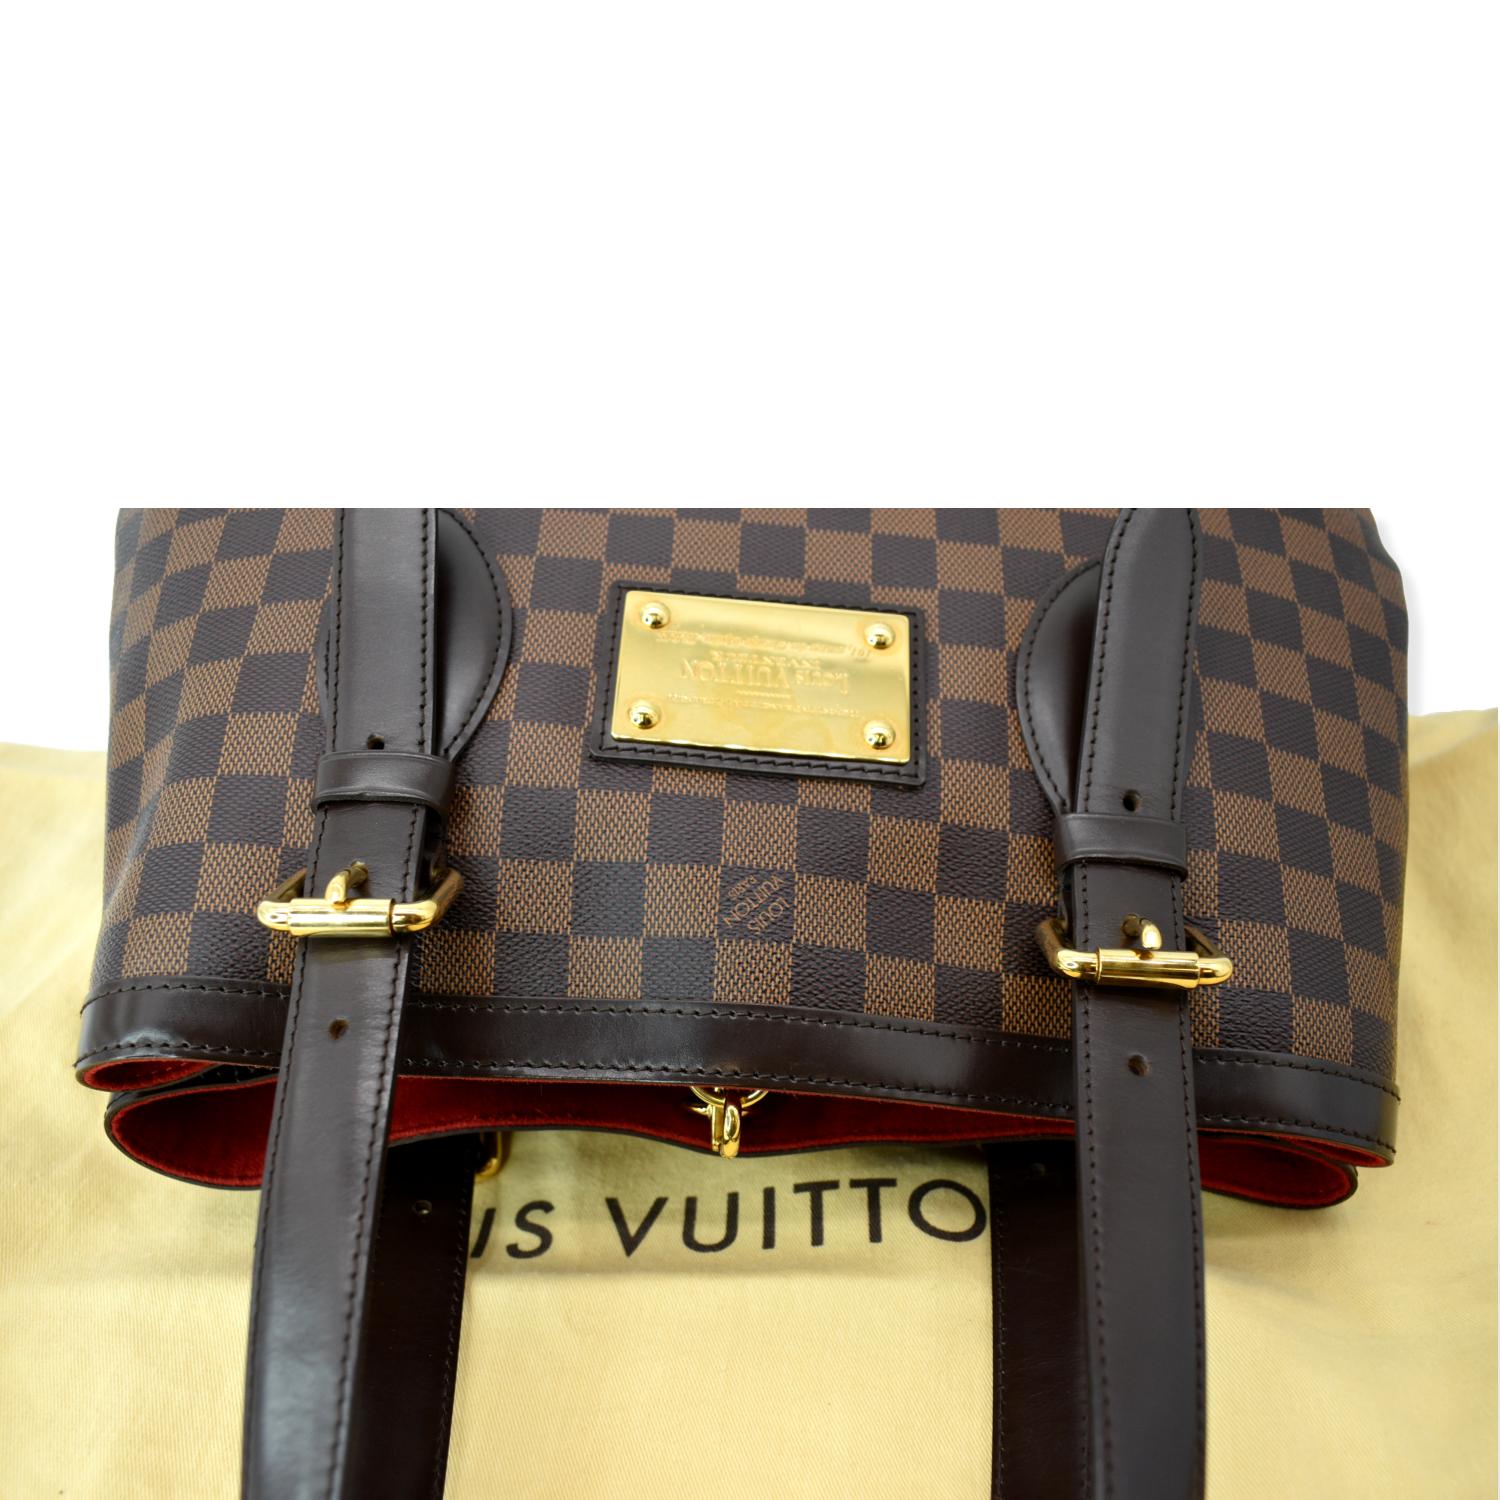 Louis Vuitton Hampstead MM - Steph's Luxury Collections